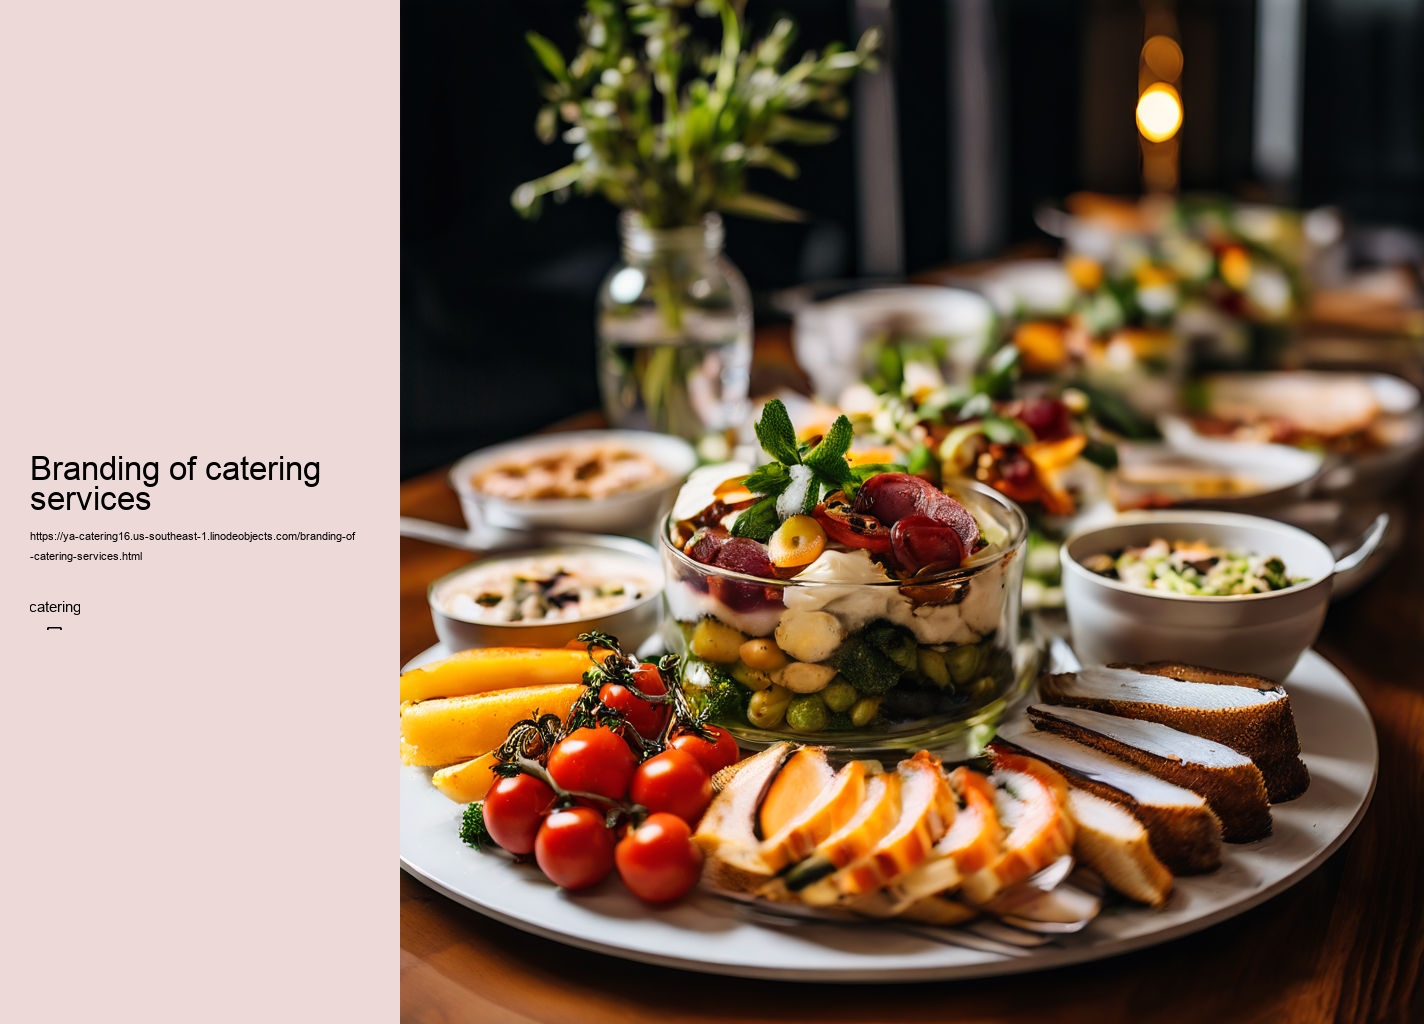 Branding of catering services